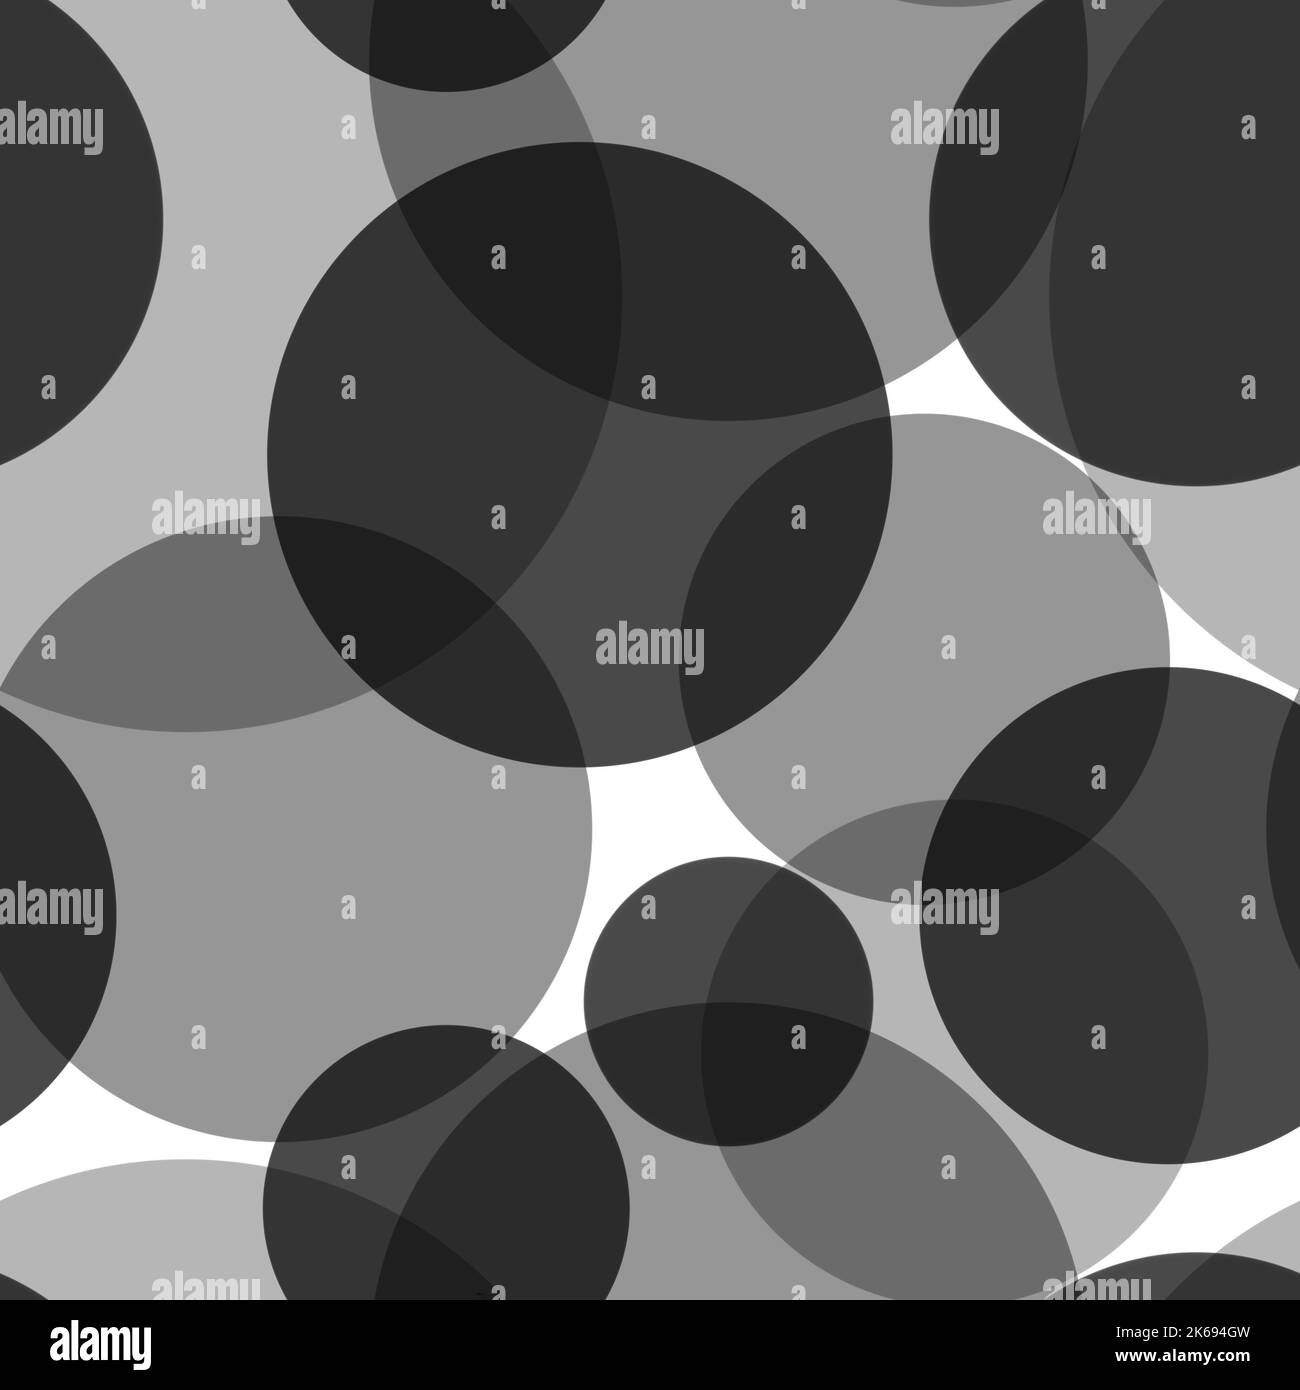 Abstract seamless pattern of random arranged overlapping transparent black circles on white.Round shapes of halftone point endless wallpaper ornament. Stock Photo